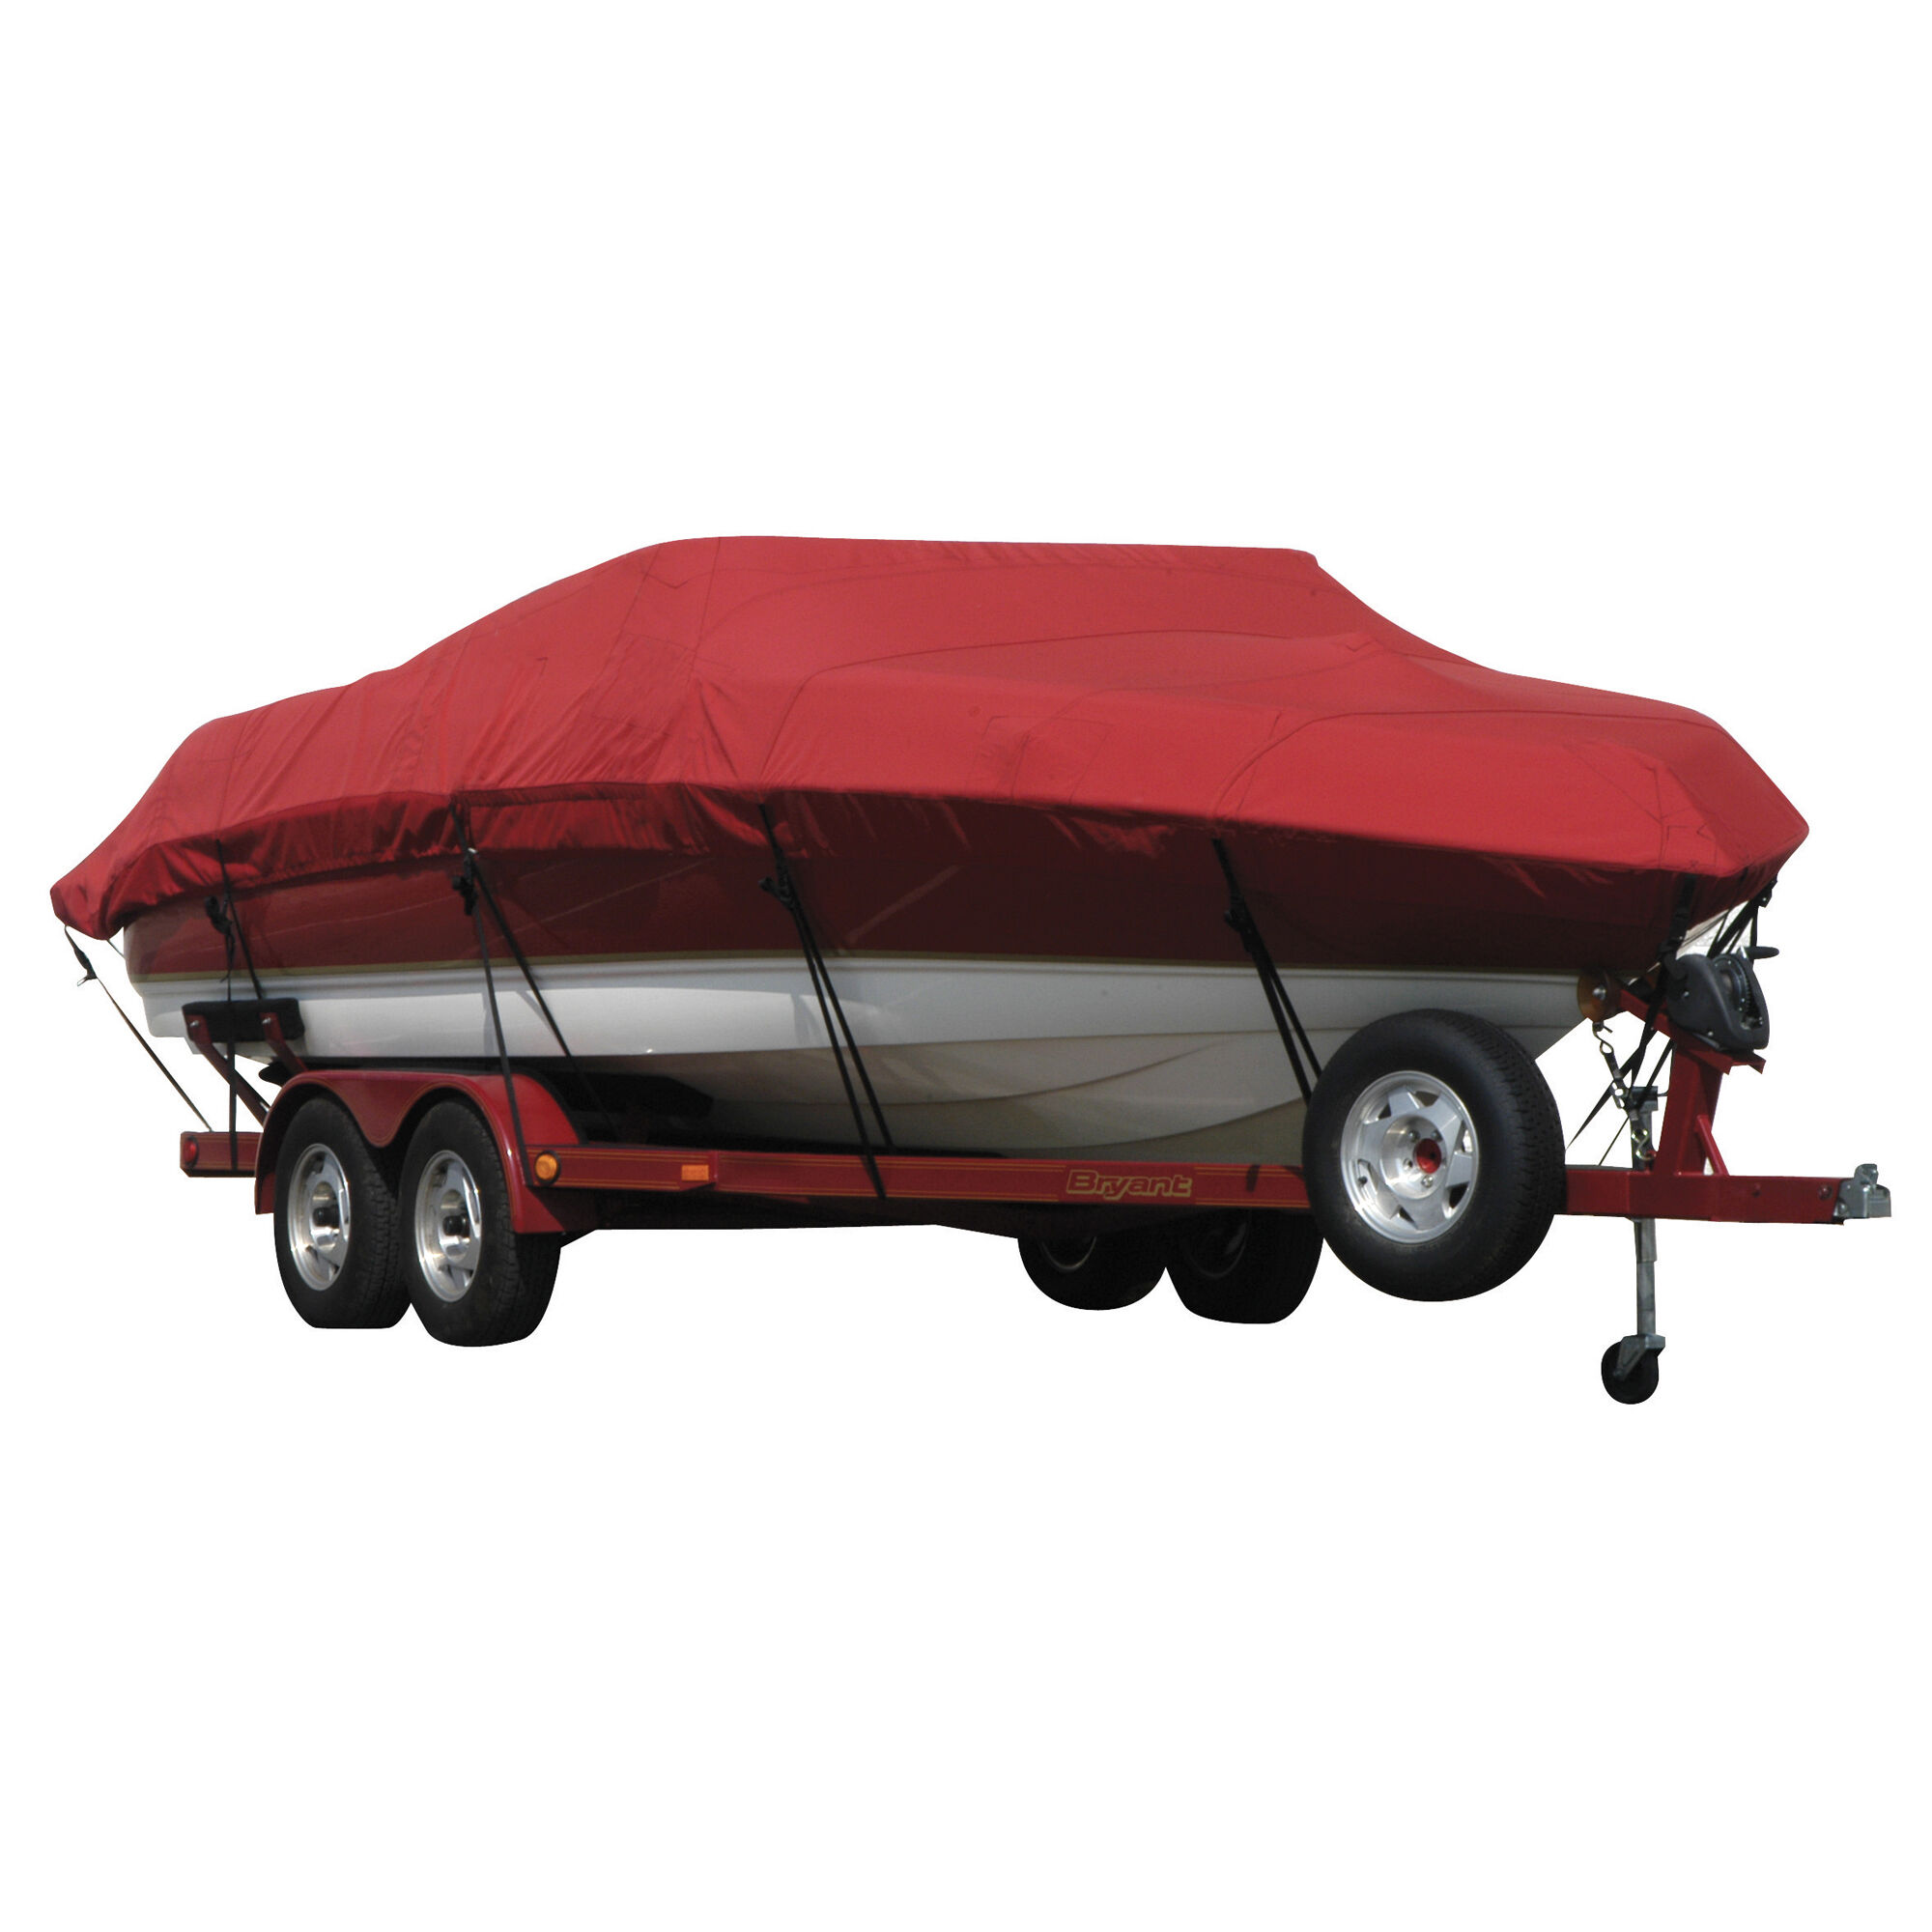 Covermate Exact Fit Sunbrella Boat Cover for Bayliner Classic 2452 Cd Classic 2452 Cd Hard Top I/O. Red